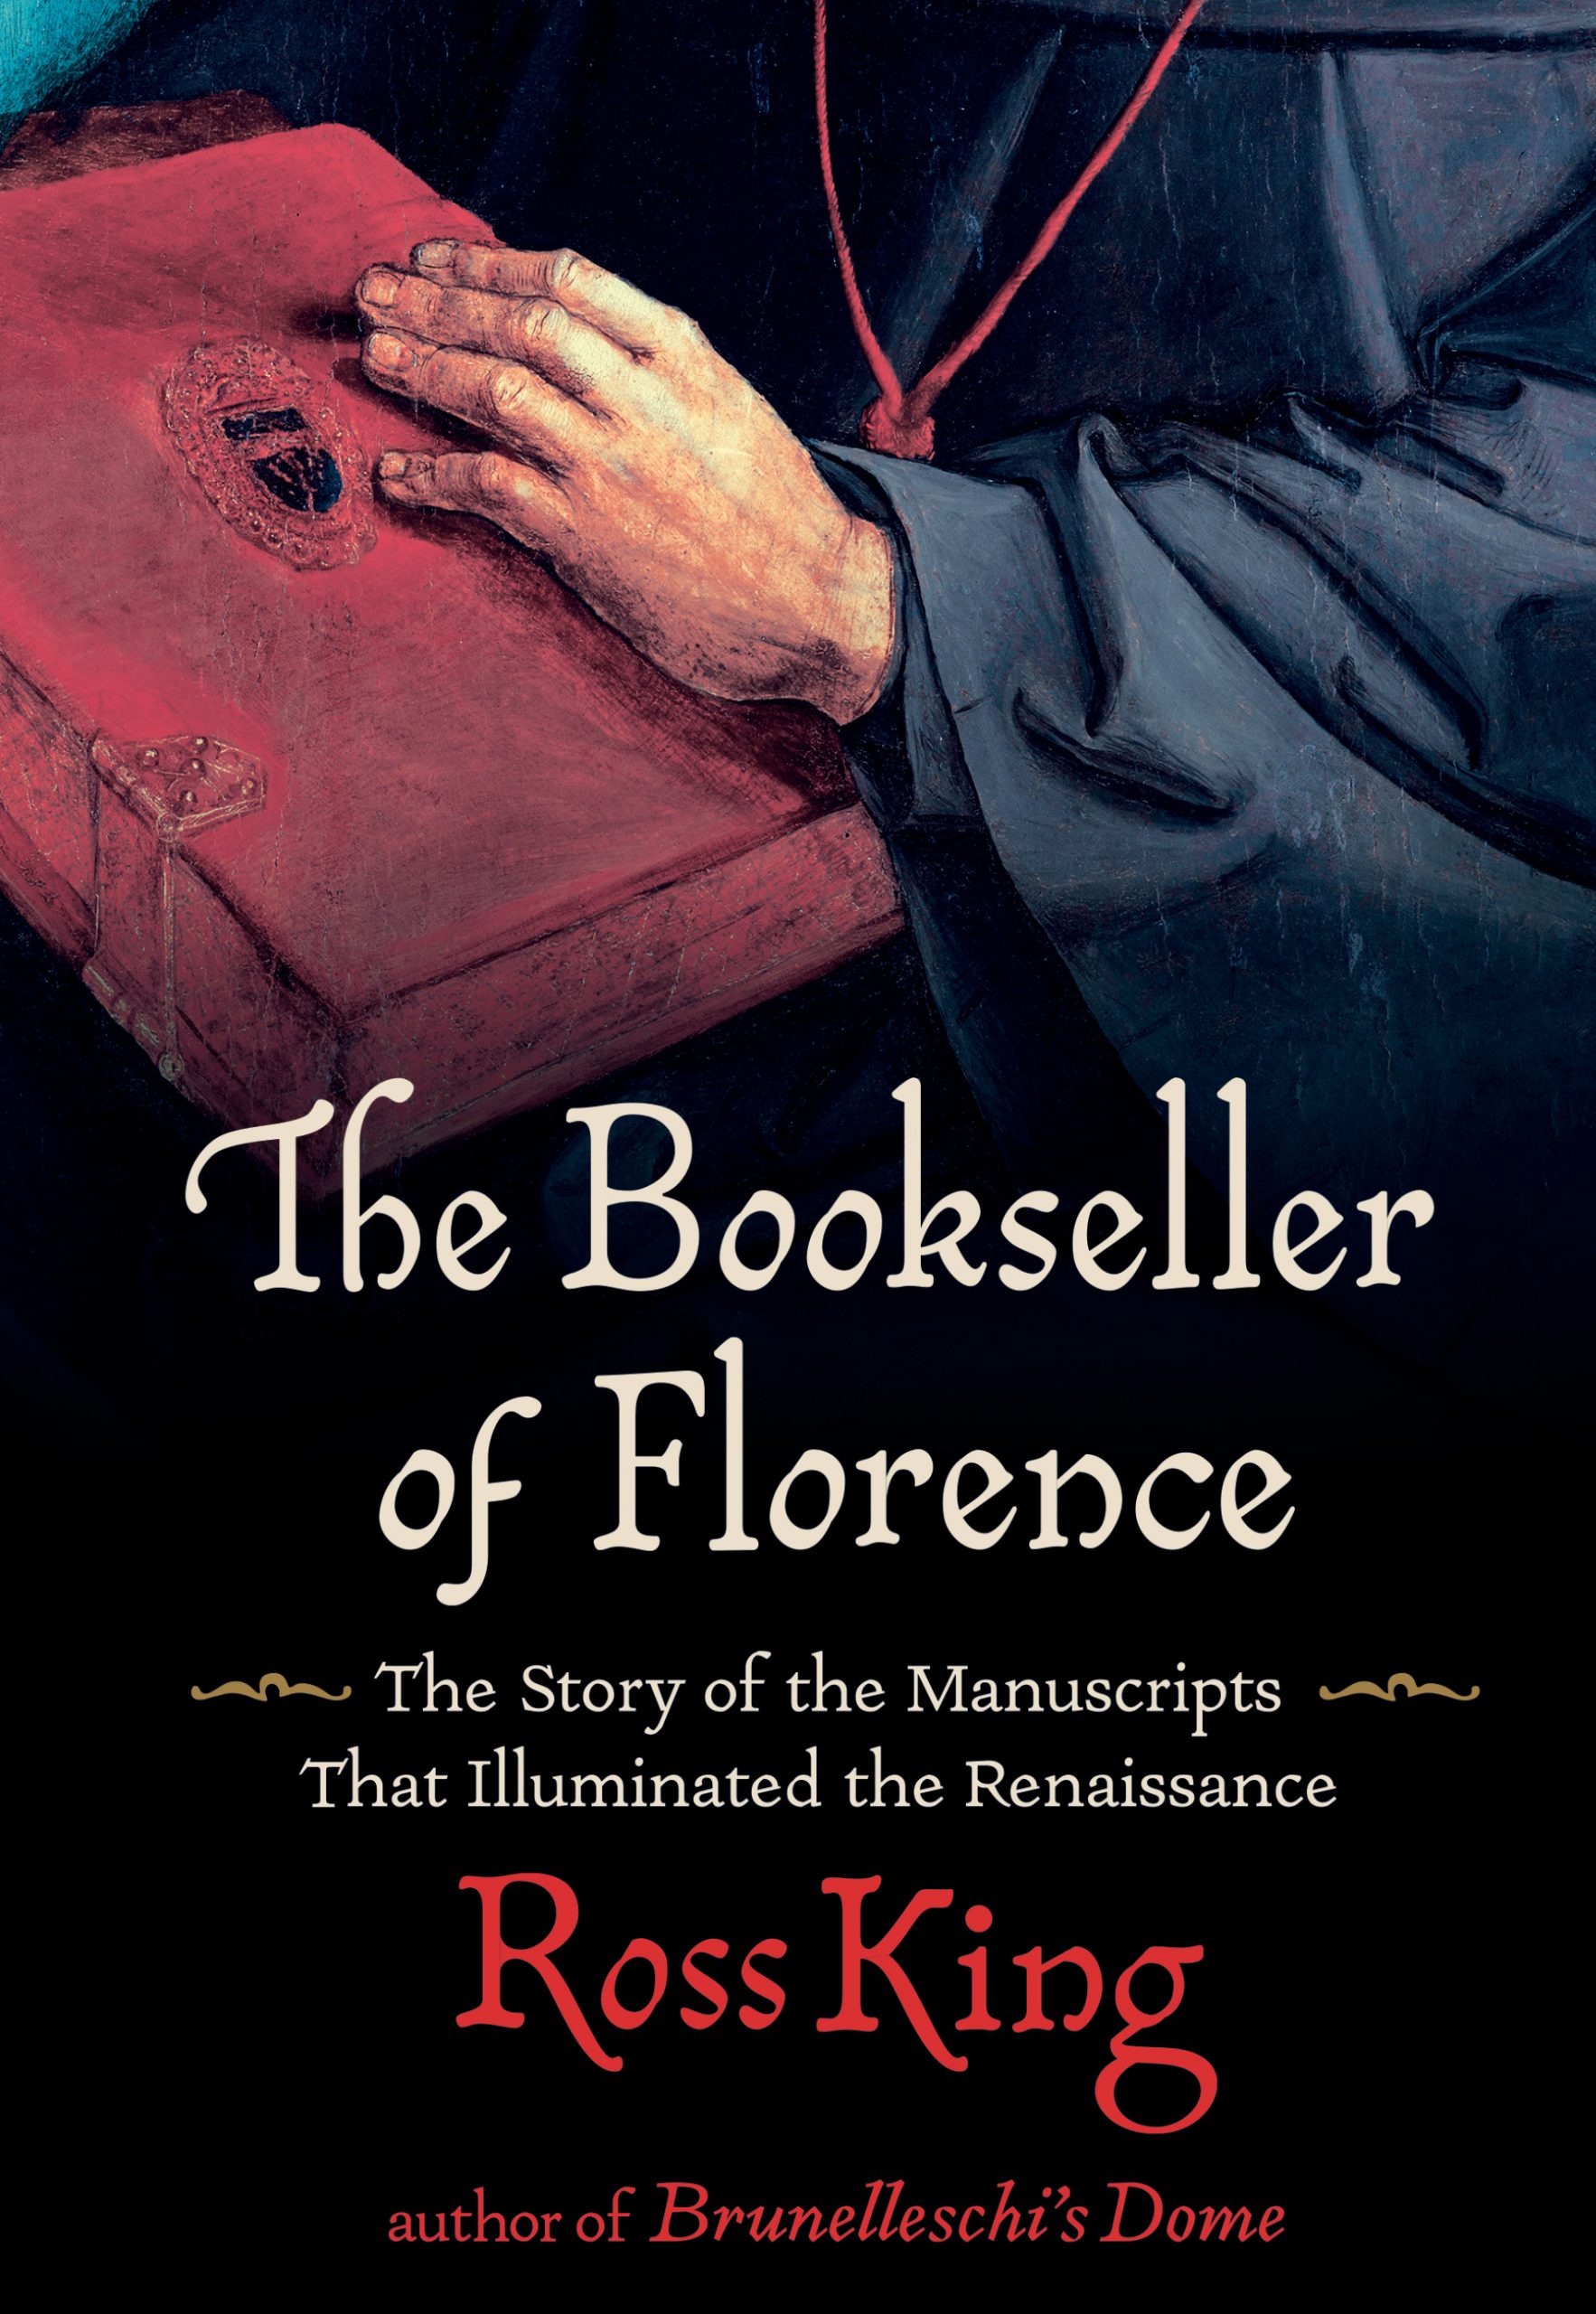 The Stories of the Art of Florence The Heart of the Renaissance